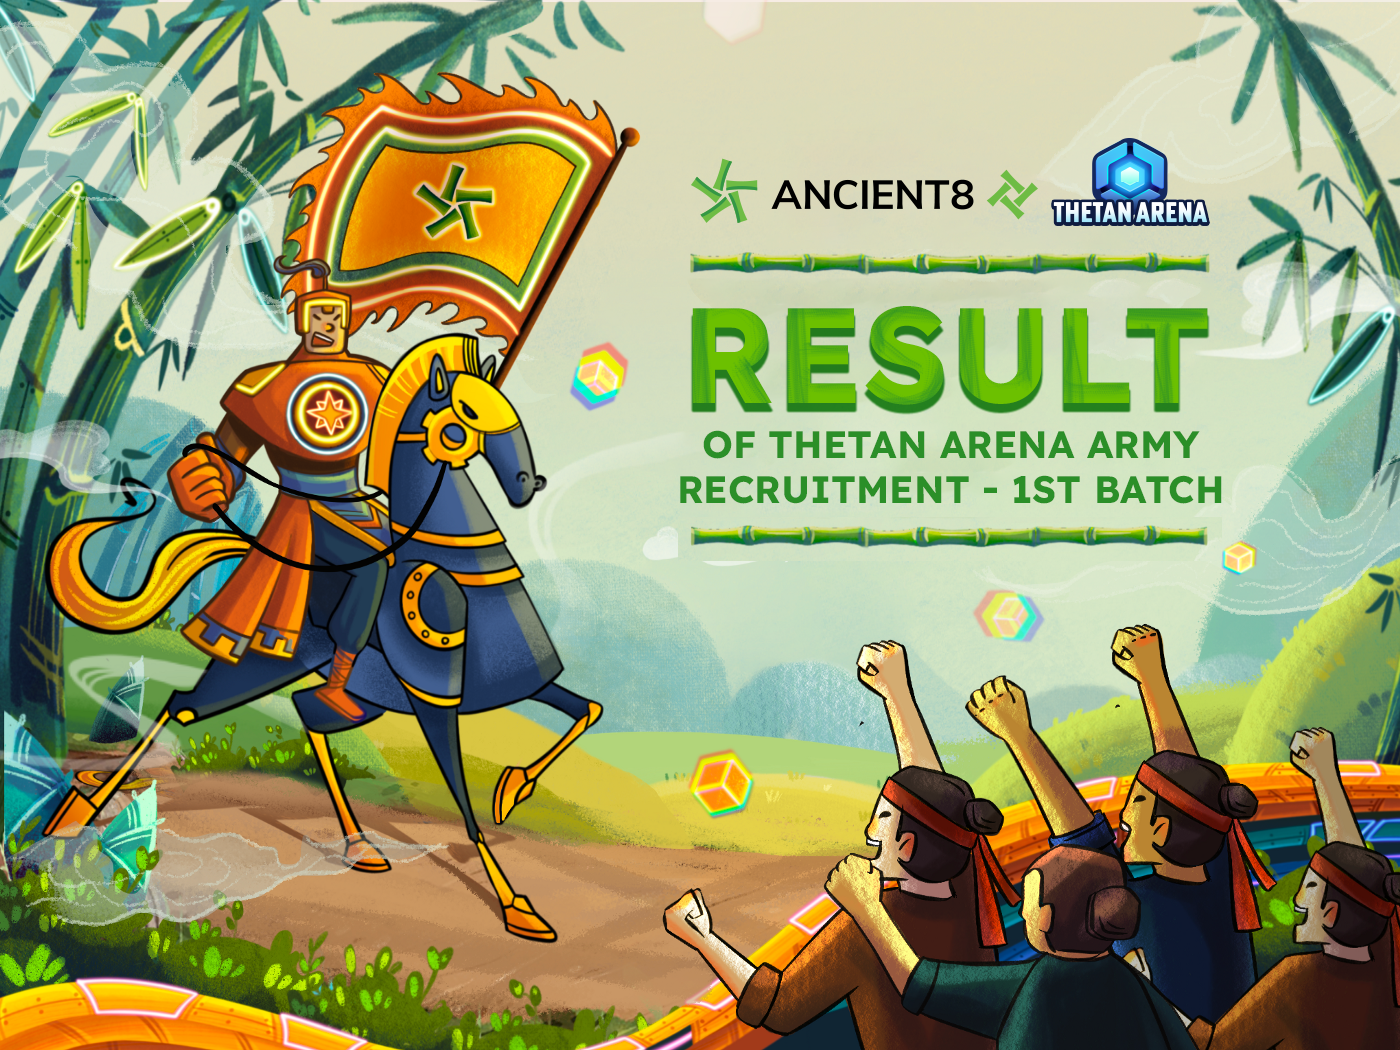 Ancient8 Thetan Arena Army Recruitment Result - 1st Batch